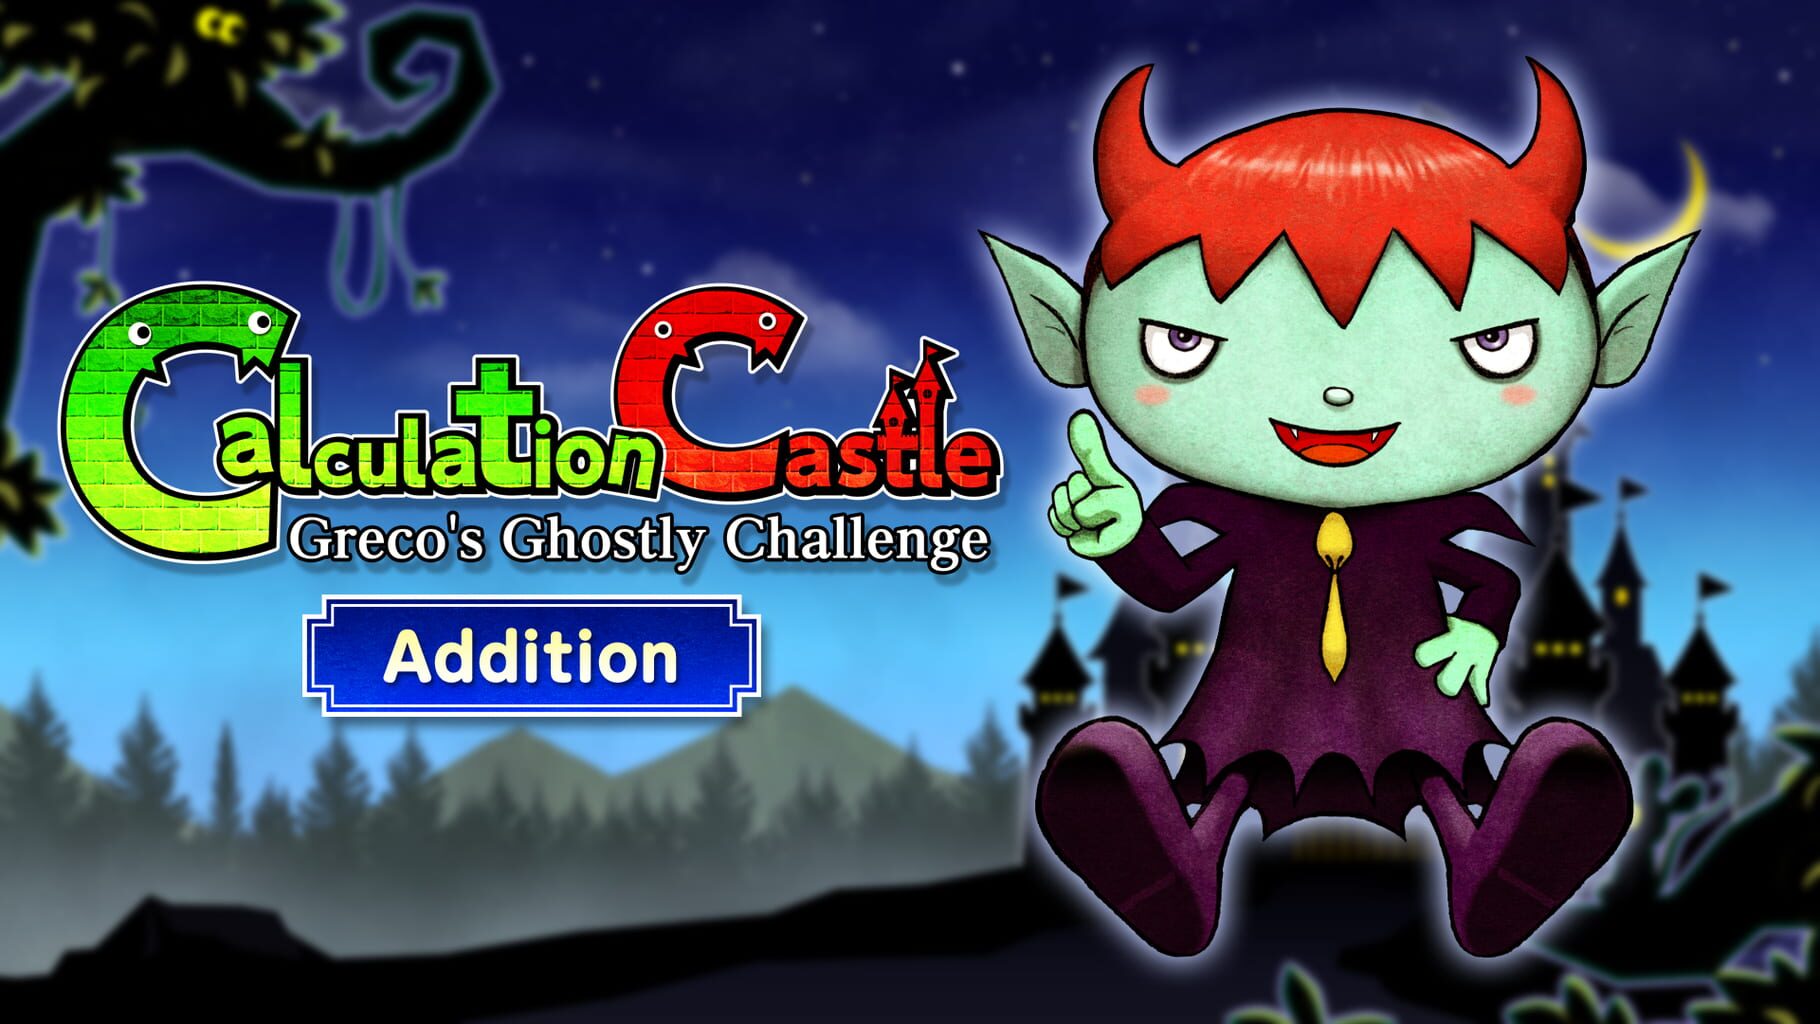 Calculation Castle: Greco's Ghostly Challenge "Addition" artwork